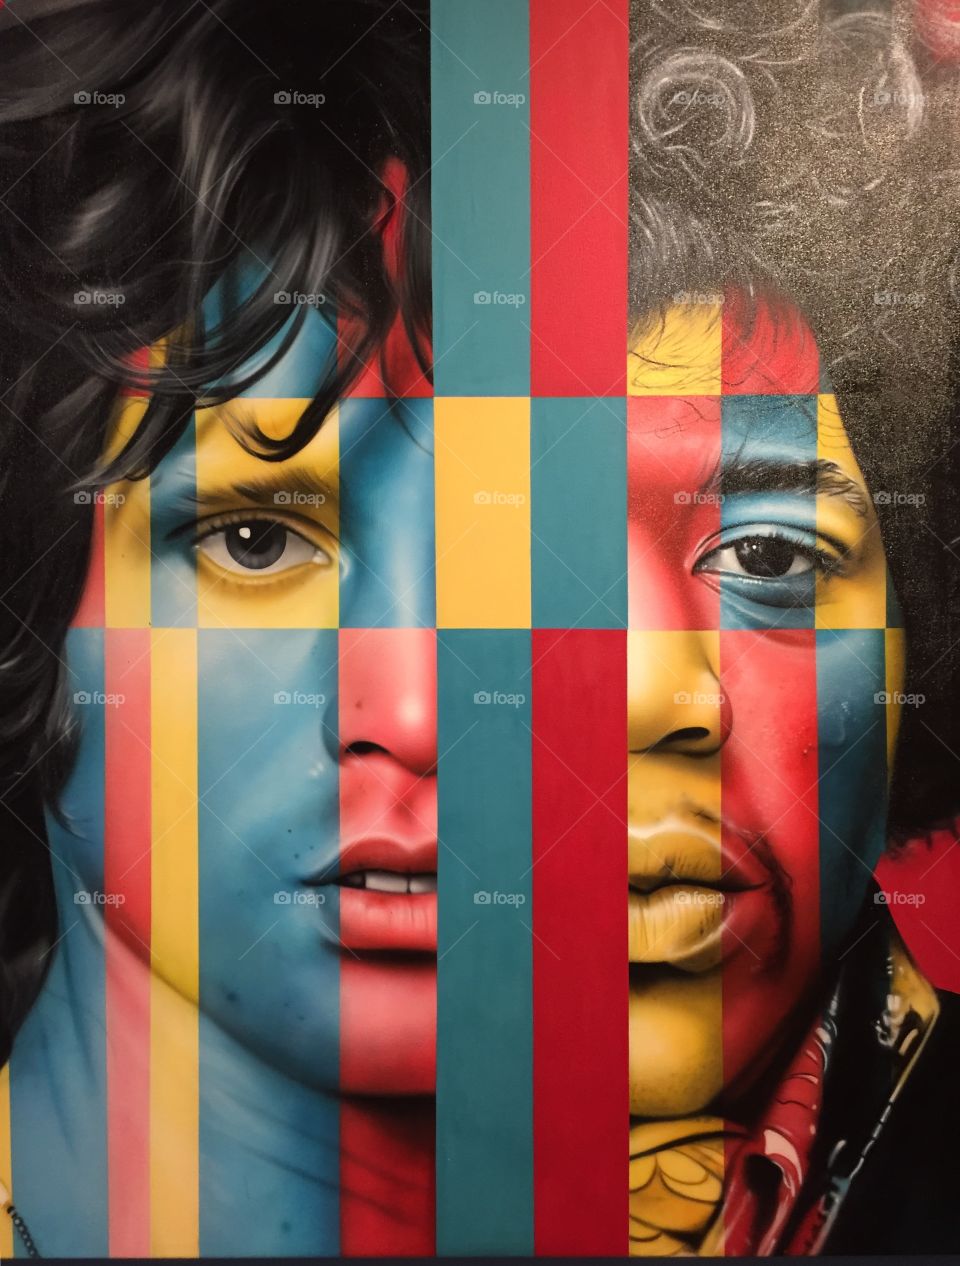 Kobra’s artsy murals are to be seen right now in Miami Wynwood! « All » murals have been reproducted into paintings. Here are Jim Morrison and Hendrix. Beautiful! 